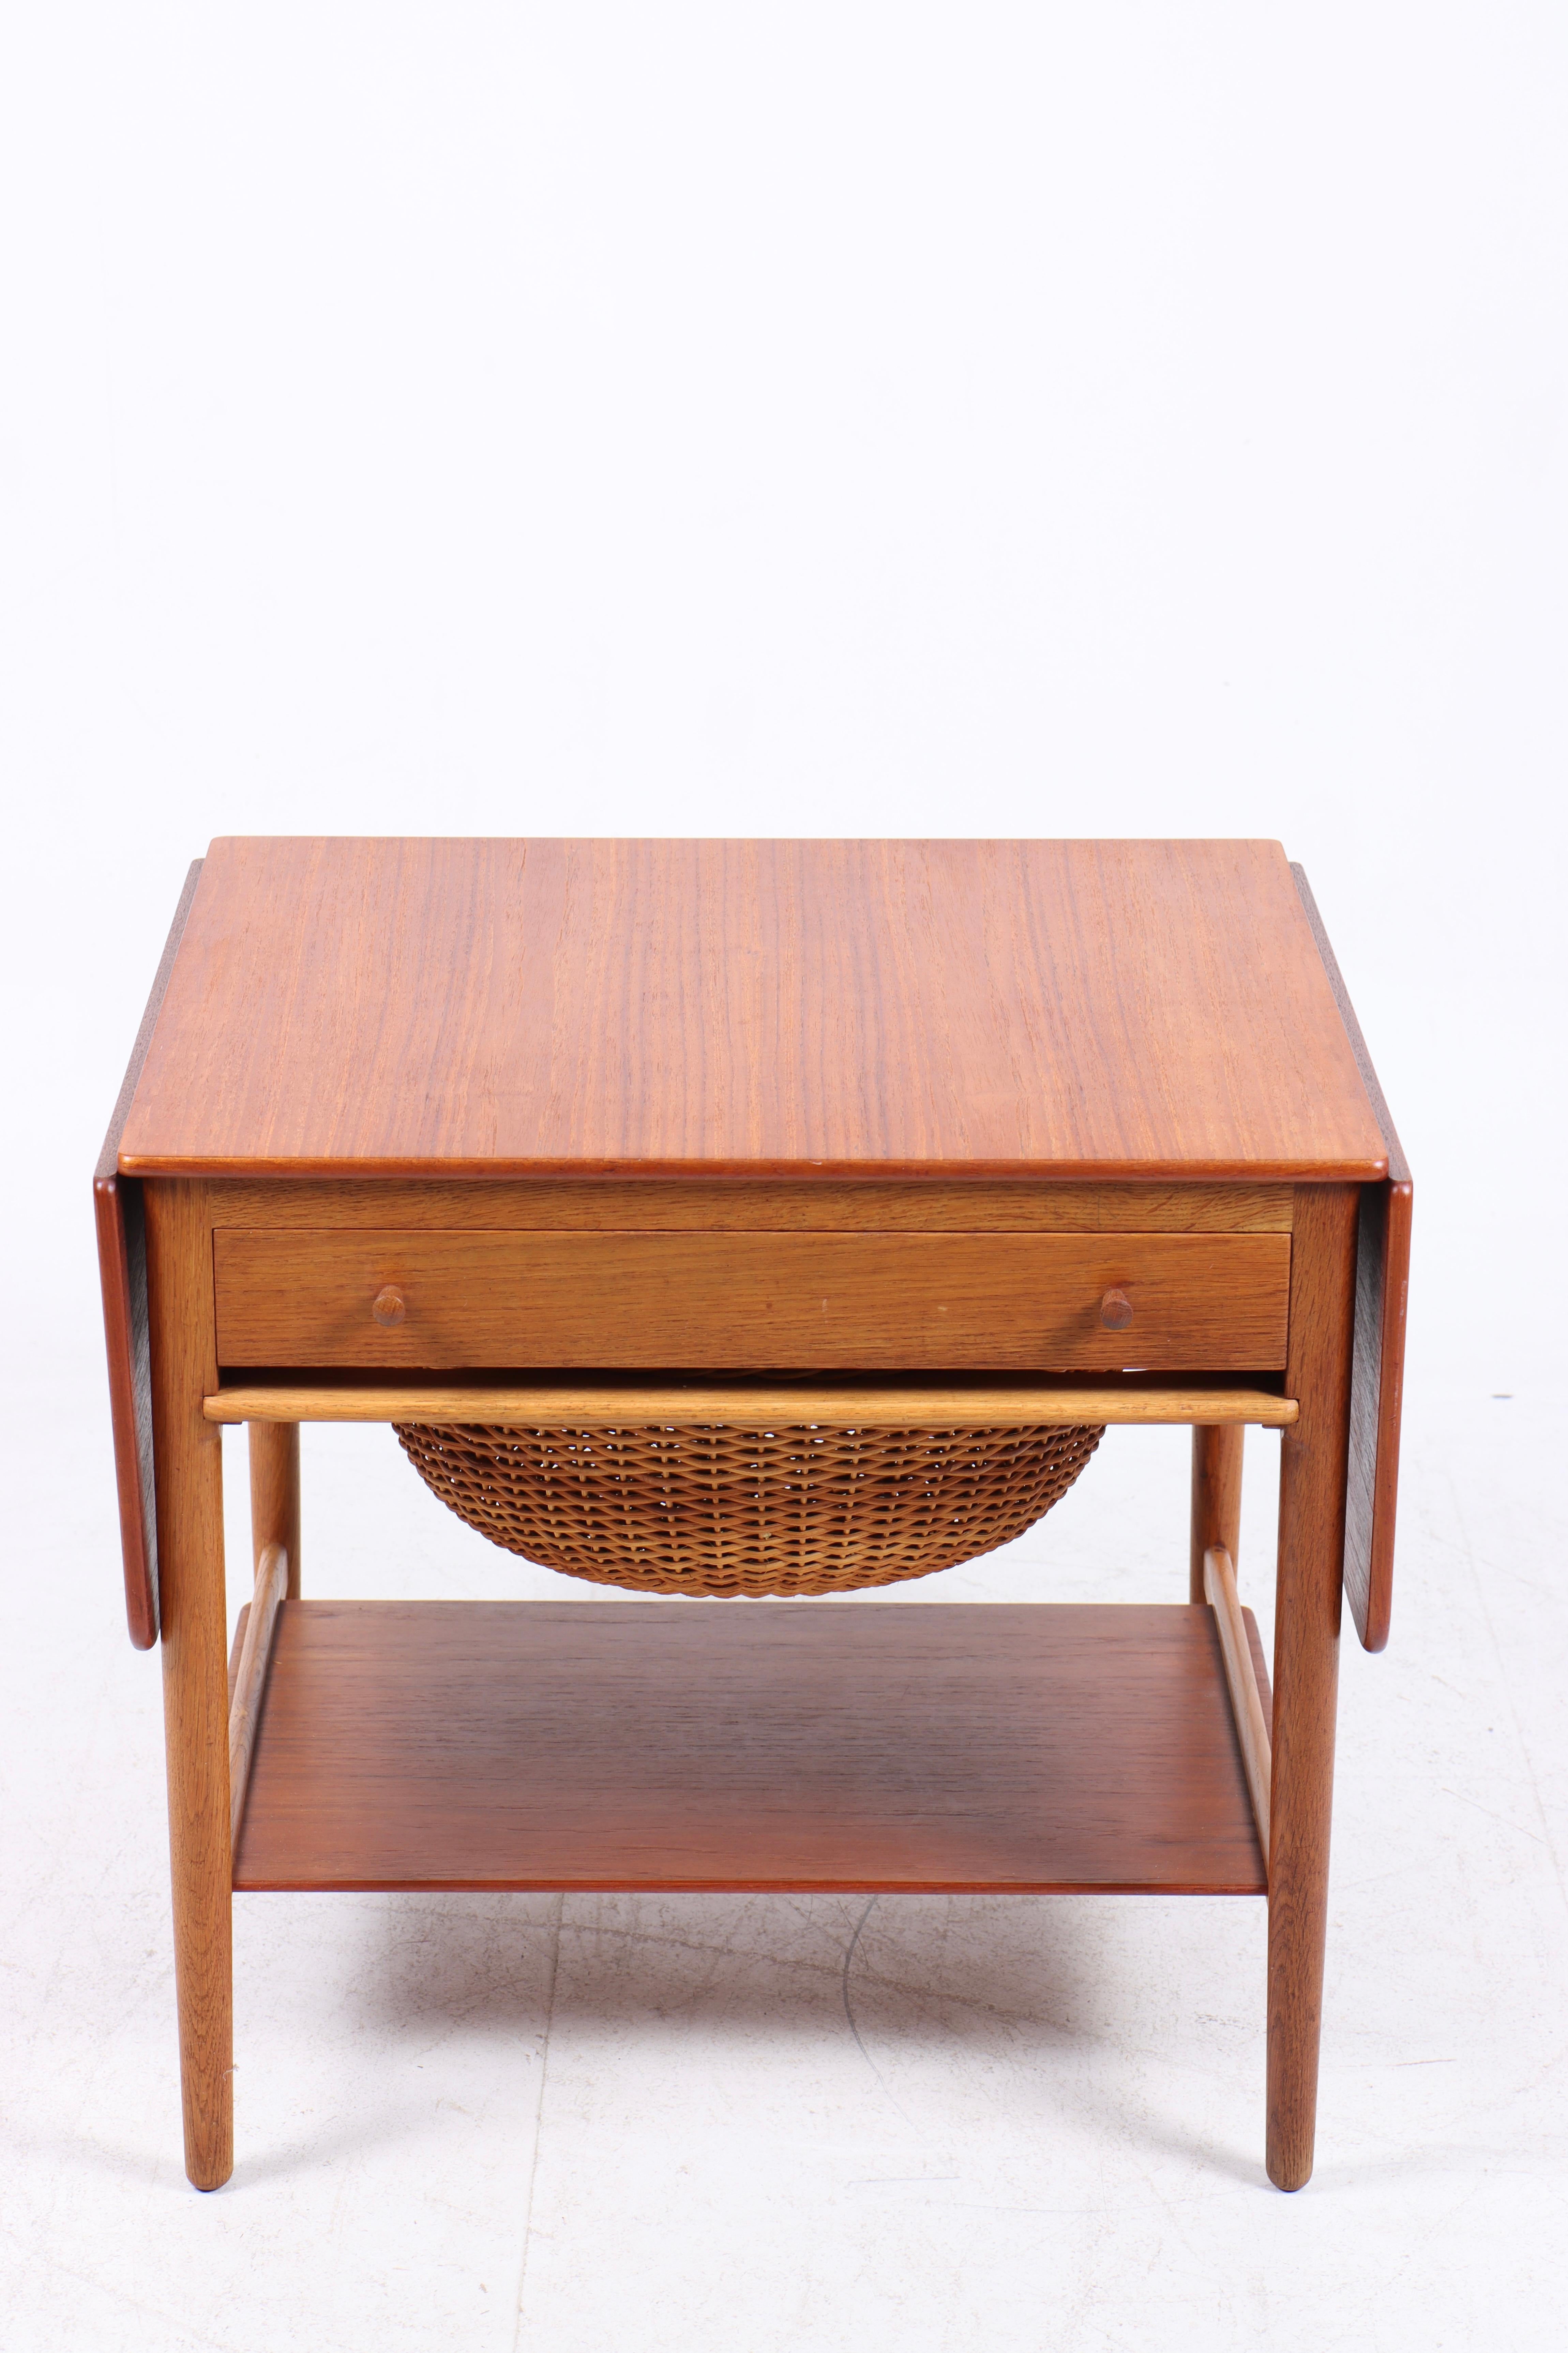 Sewing table in solid teak and oak, designed by Hans Wegner and made by Andreas Tuck cabinetmakers. Great original condition.